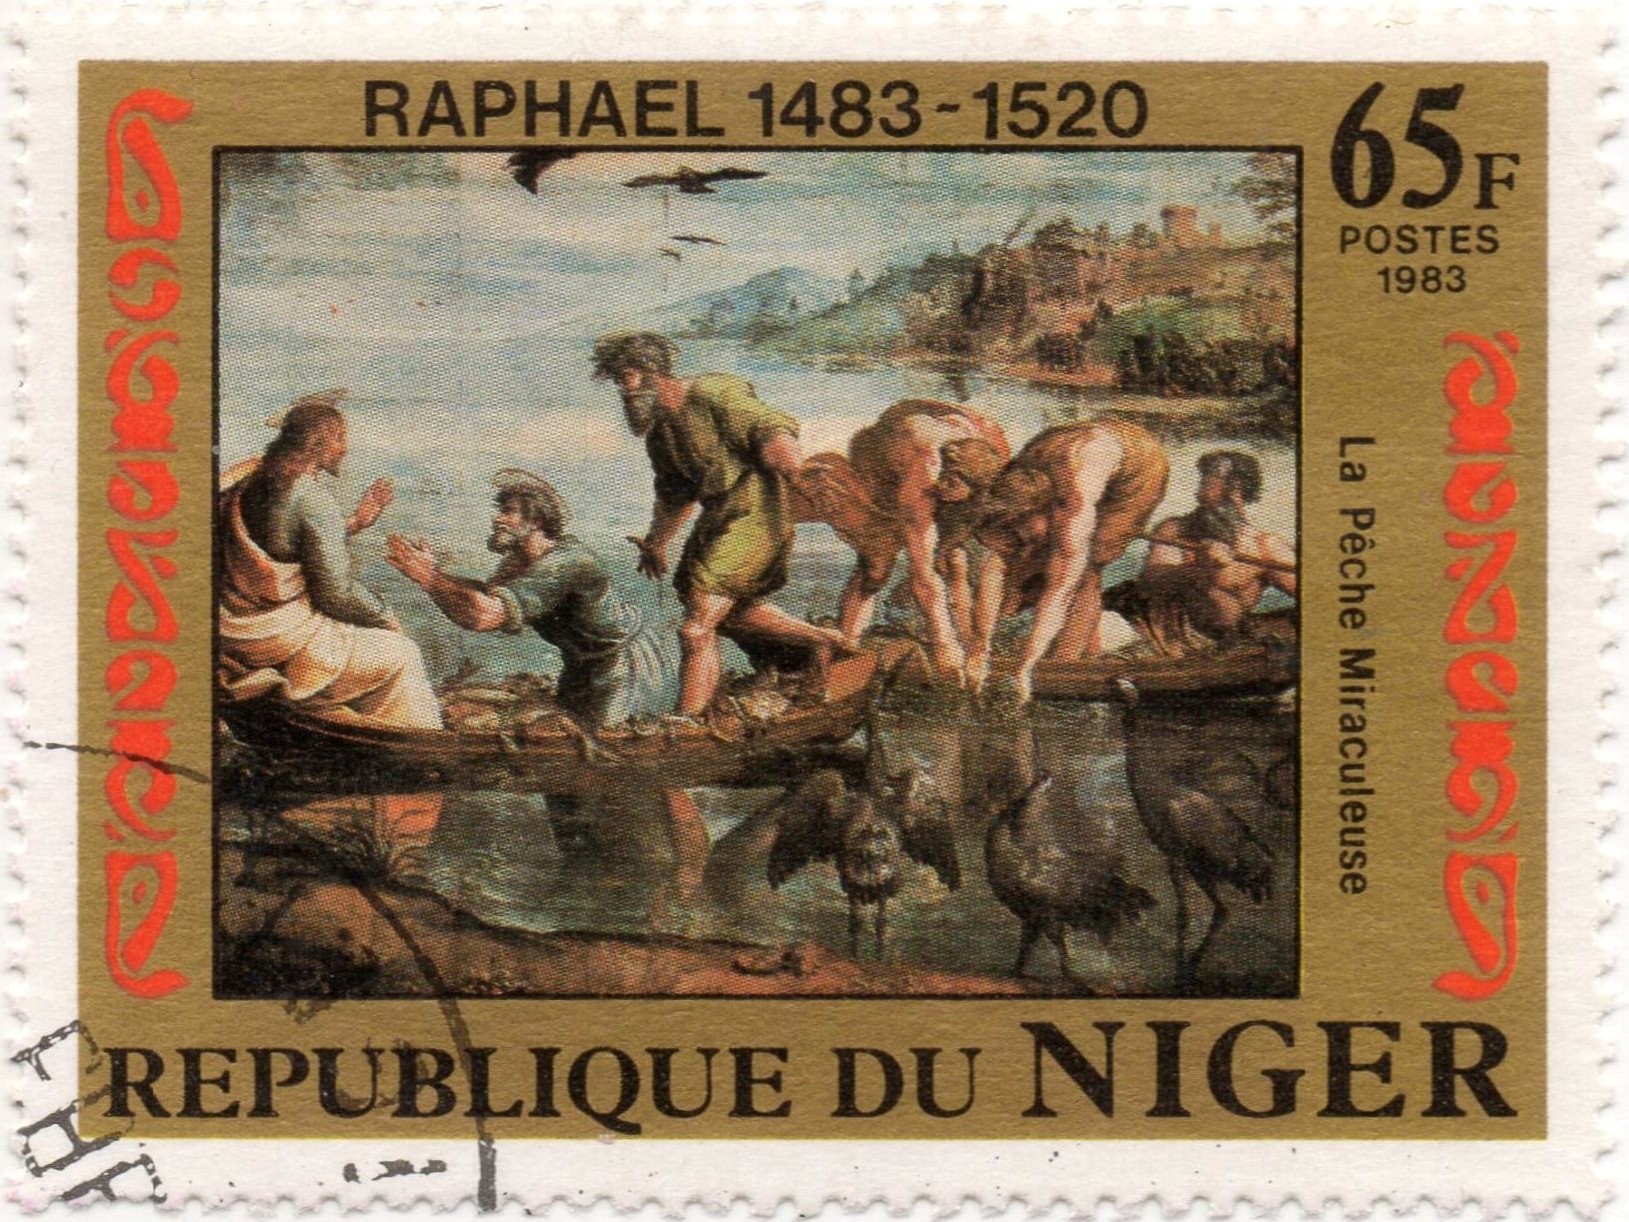 nft #1 The Miraculous Draft of Fishes Raphael 1483 - 1520 Republic of Niger 65 f. postes 1983